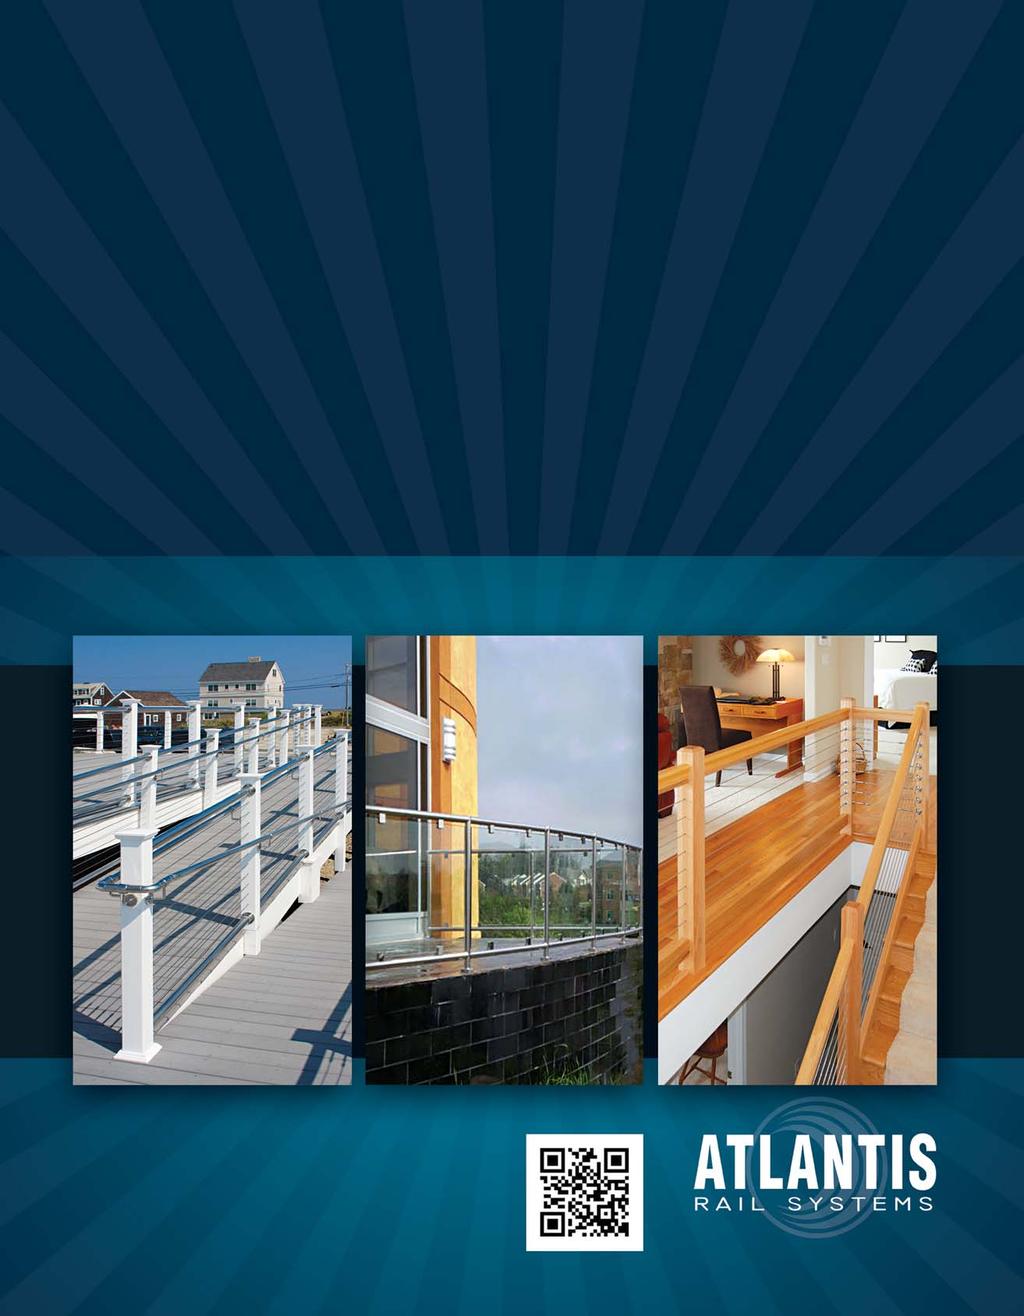 Thank you for making tlantis Rail Systems your number one source for quality stainless steel railing products!